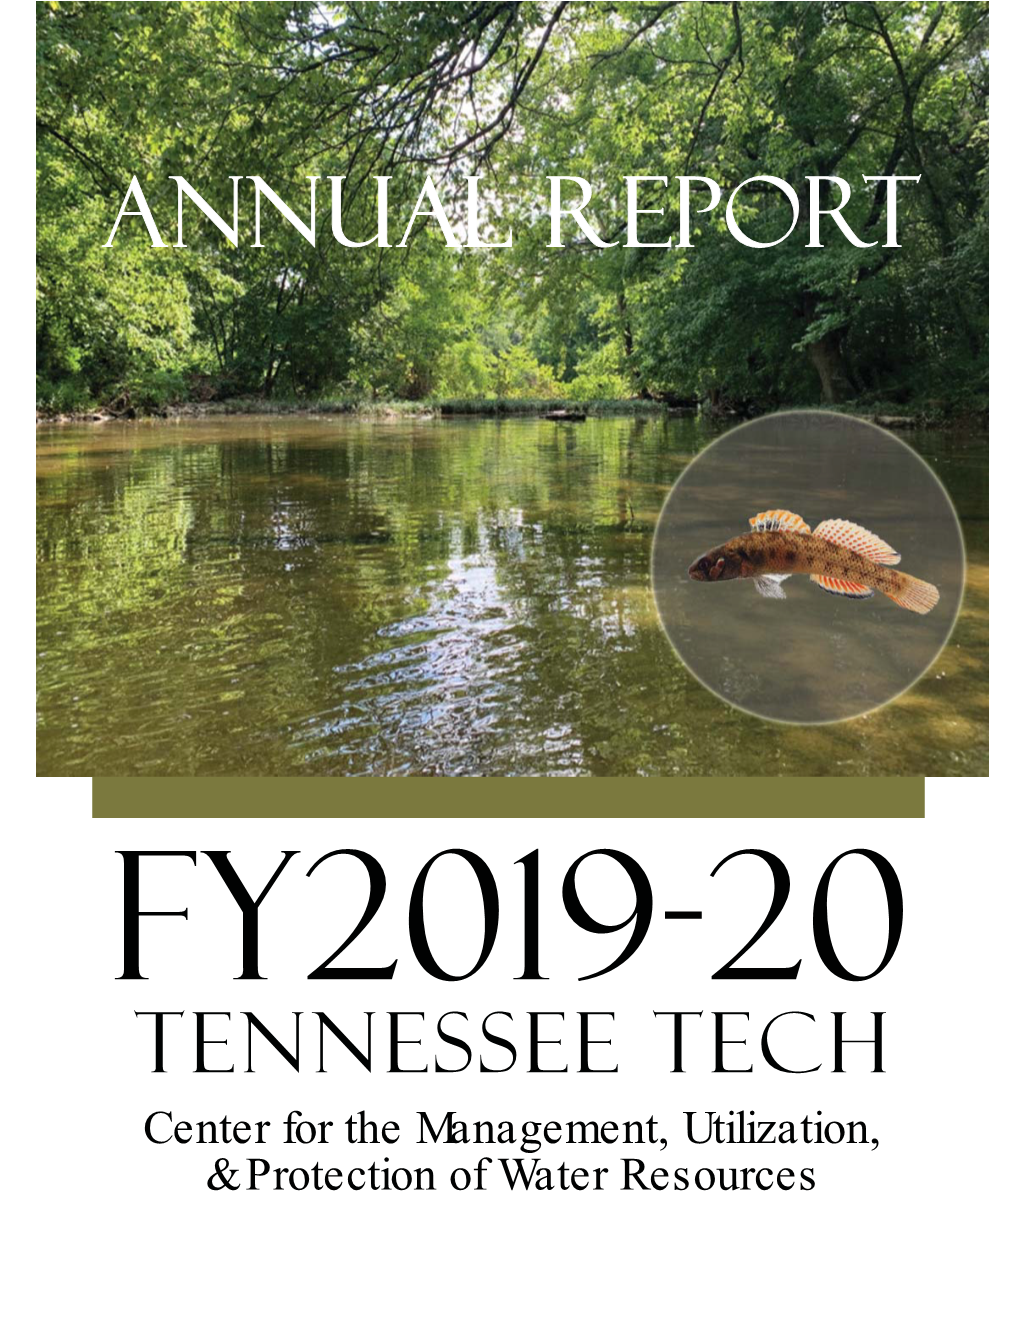 Annual Report and Updates the Website